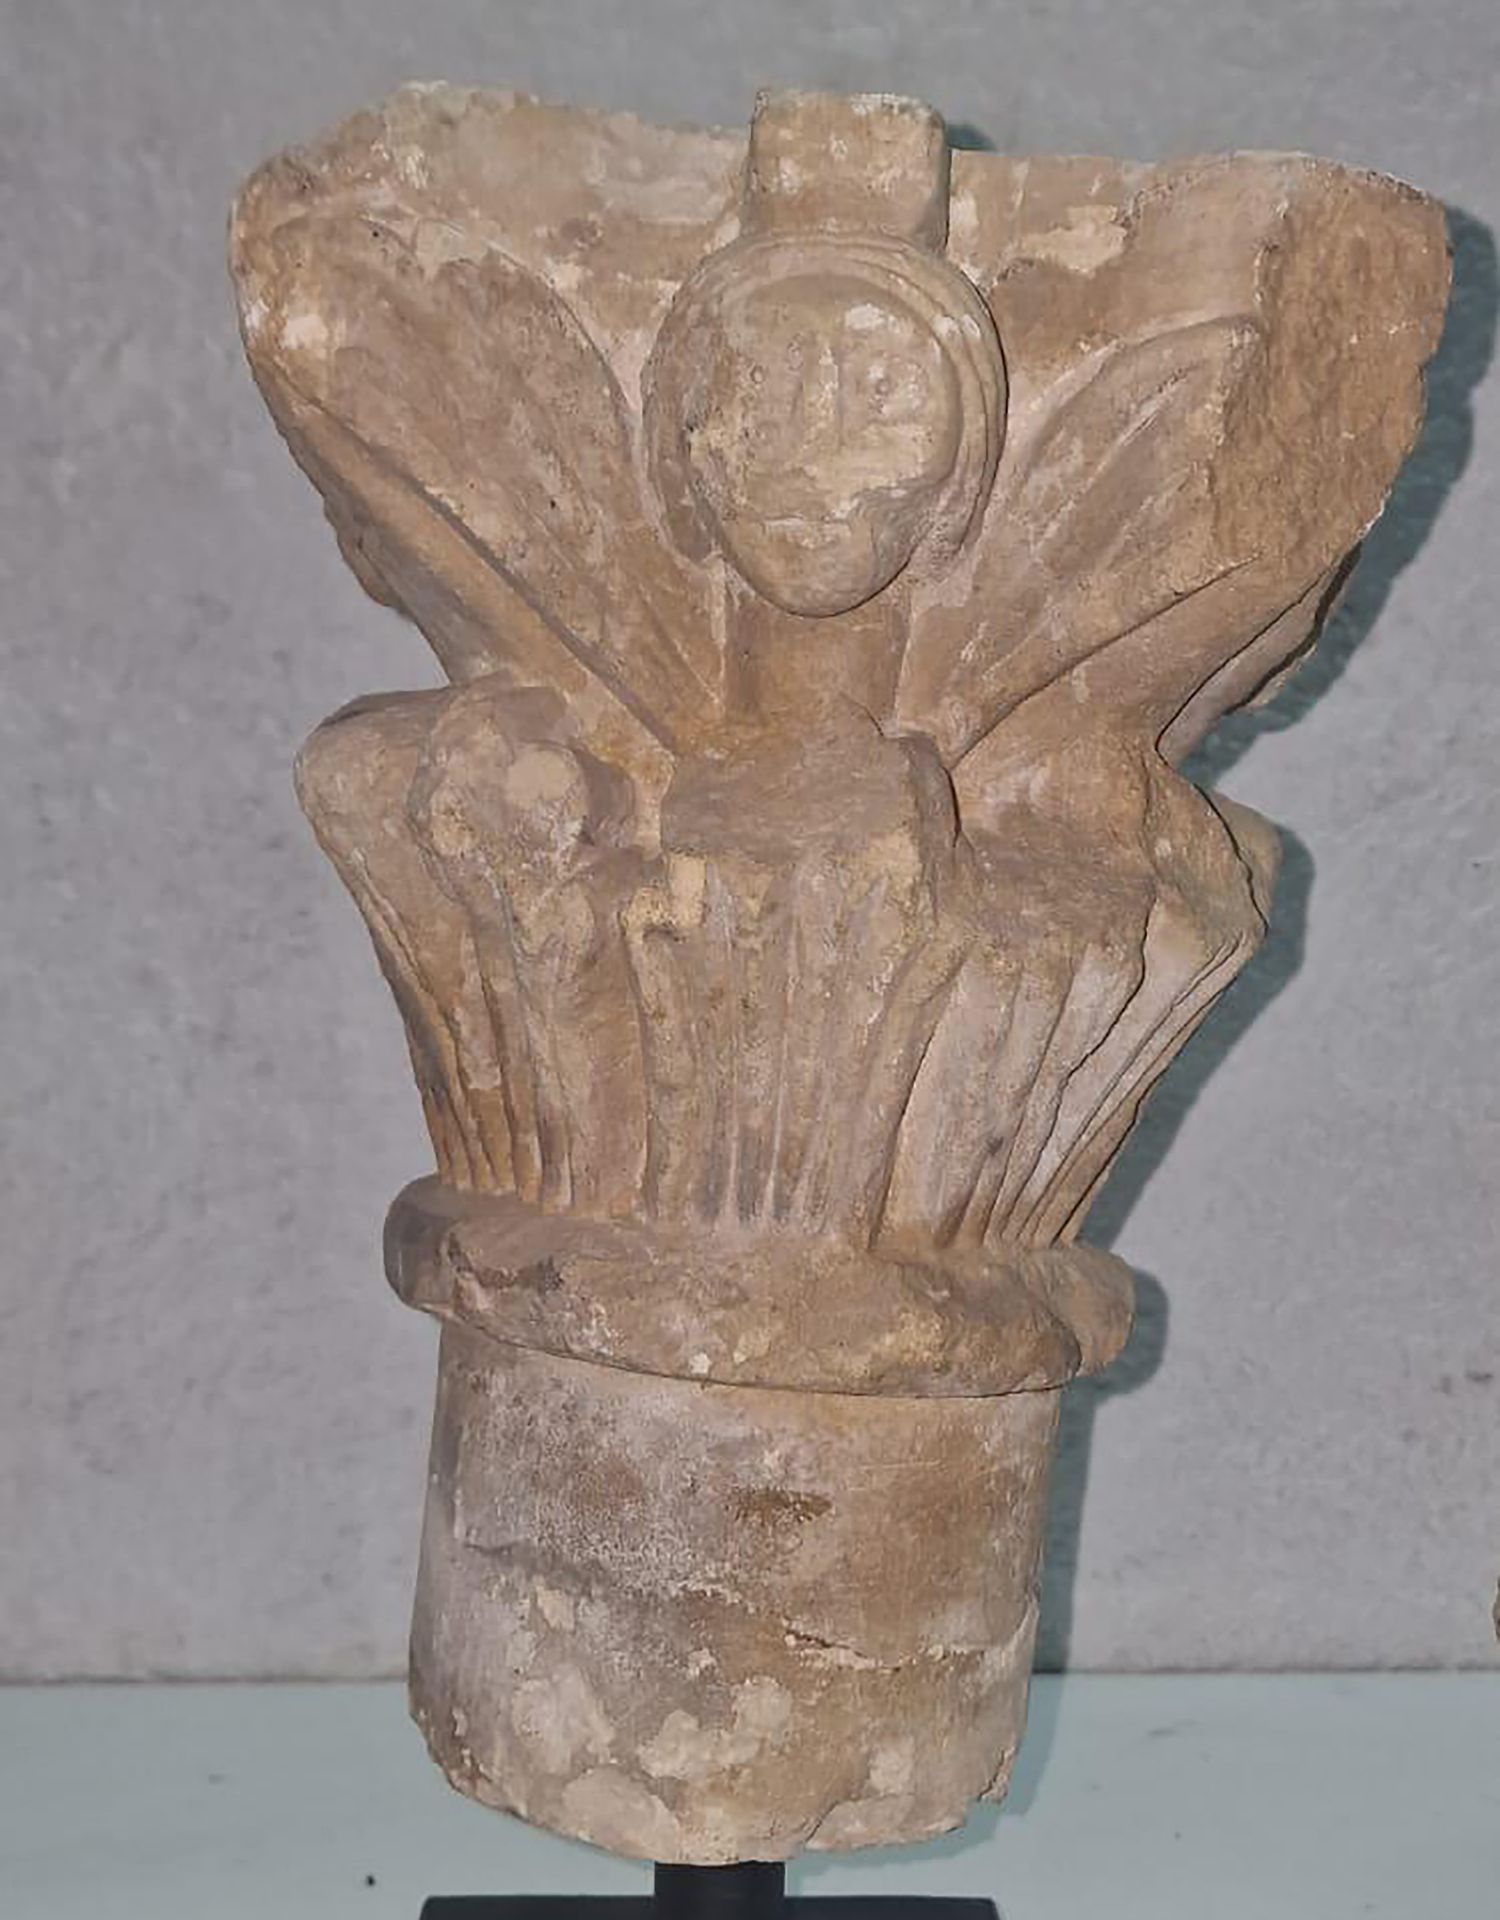 Late Capital - Catalan Romanesque in stone, 13th - 14th centuries - Image 3 of 4